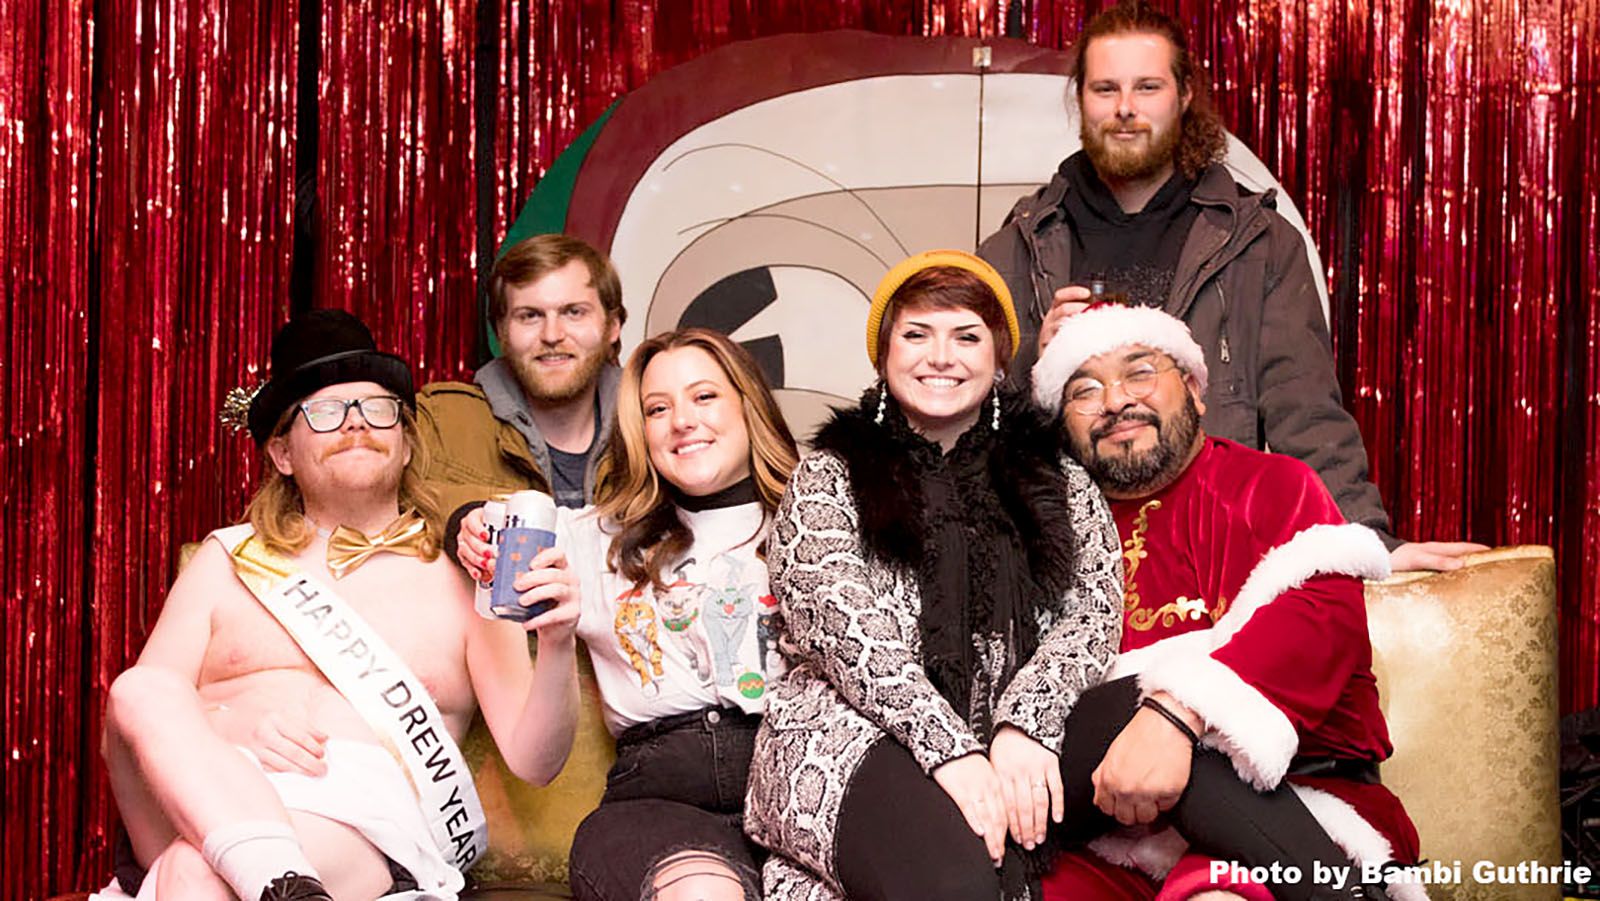 Holiday cheer will be in abundance during Santa Photo Shoot with Bambi Guthrie Photography at 9 p.m. on Friday, Dec. 22, at The Brass Rail. While that will be for those 21-and-over, there’s plenty of other activities for all to enjoy.